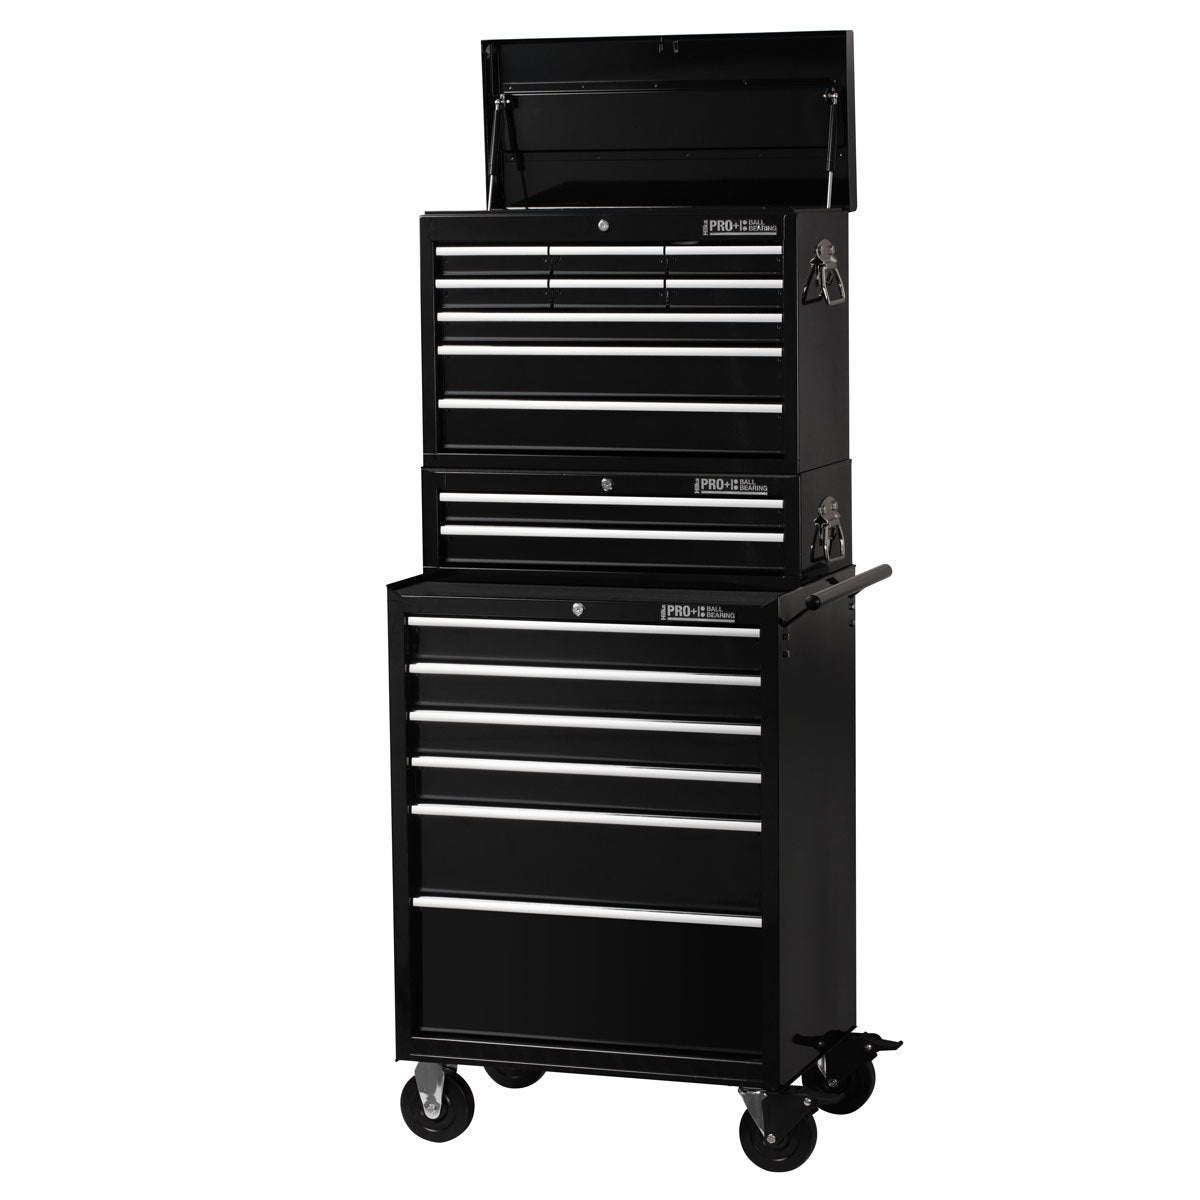 Hilka HD Pro+ 17-Drawer Combination Tool Chest Trolley - Signature Retail Stores